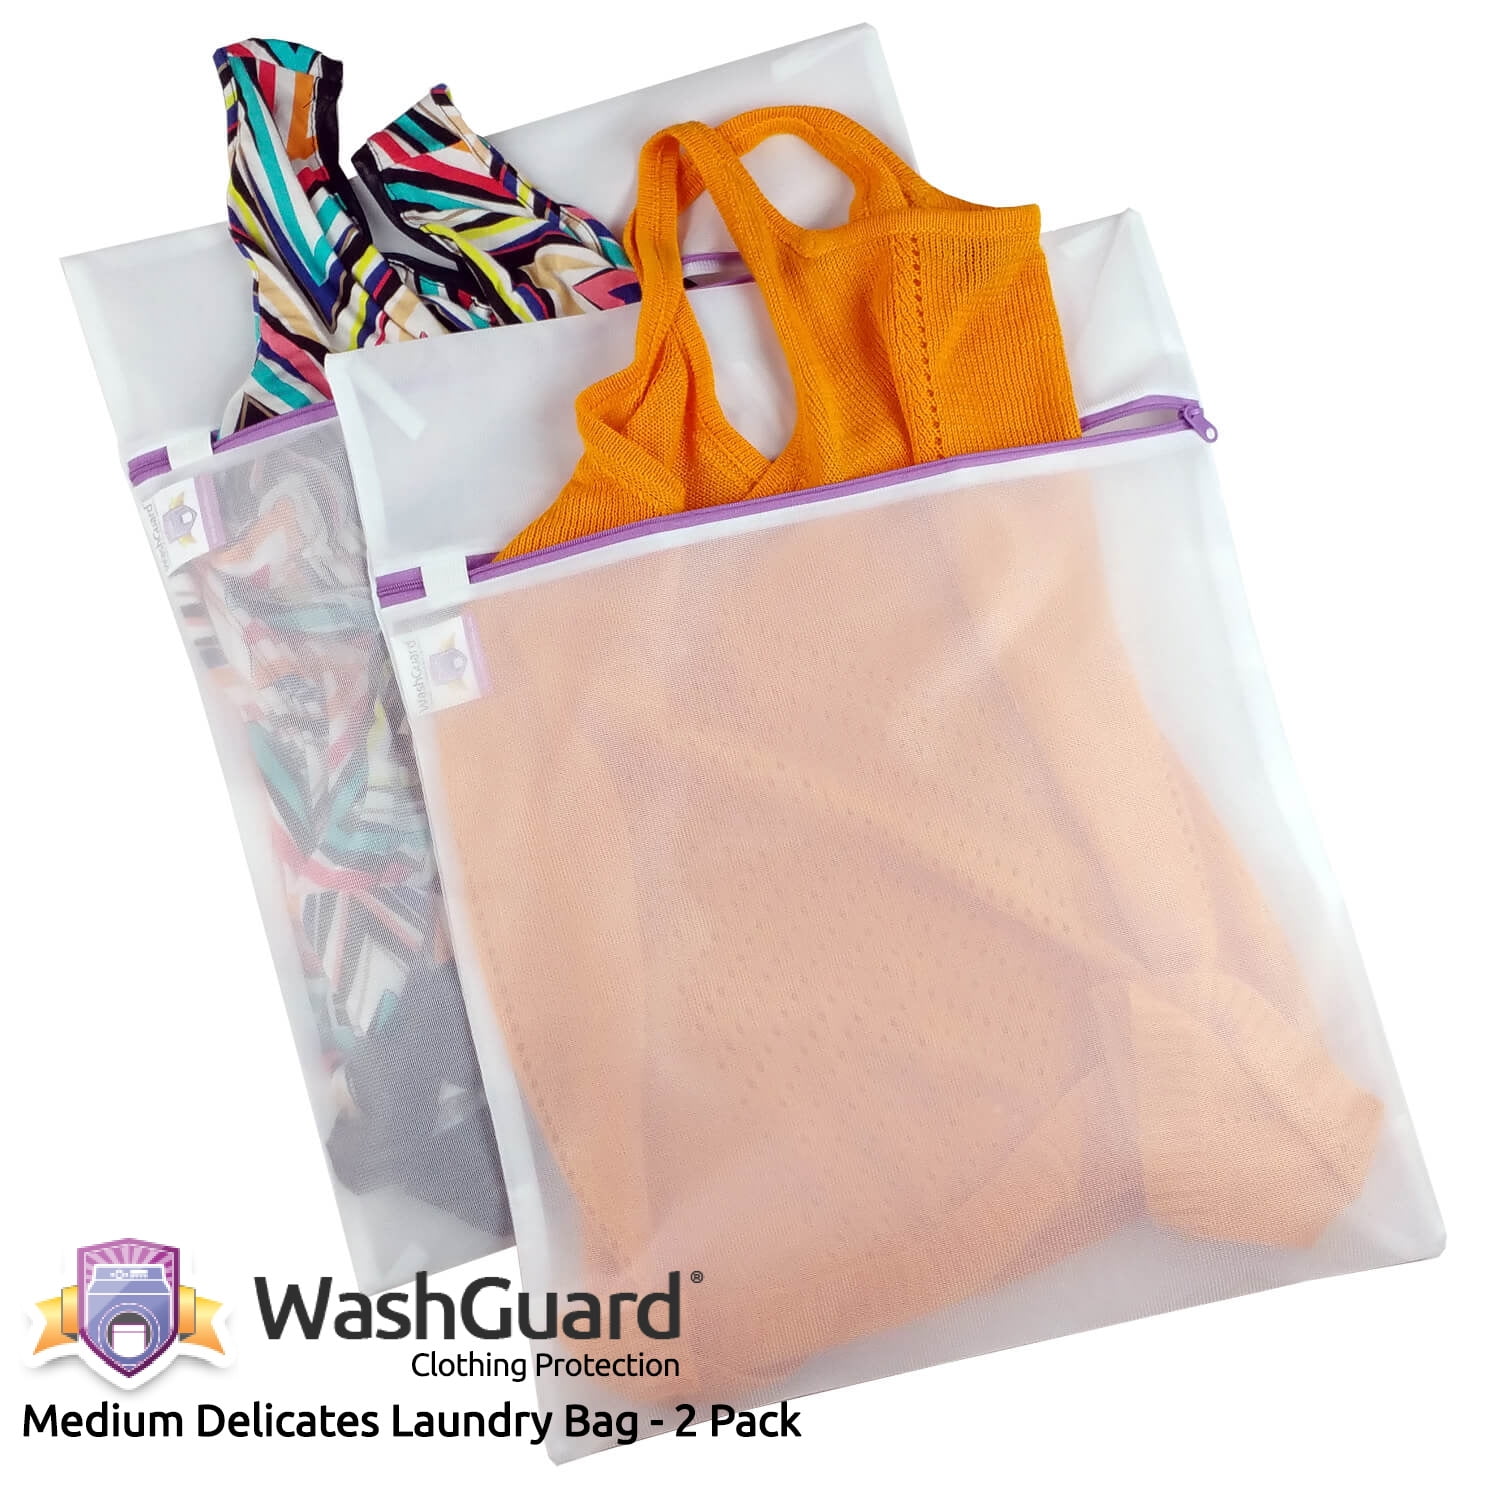 How to Wash With Laundry Bags | ehow